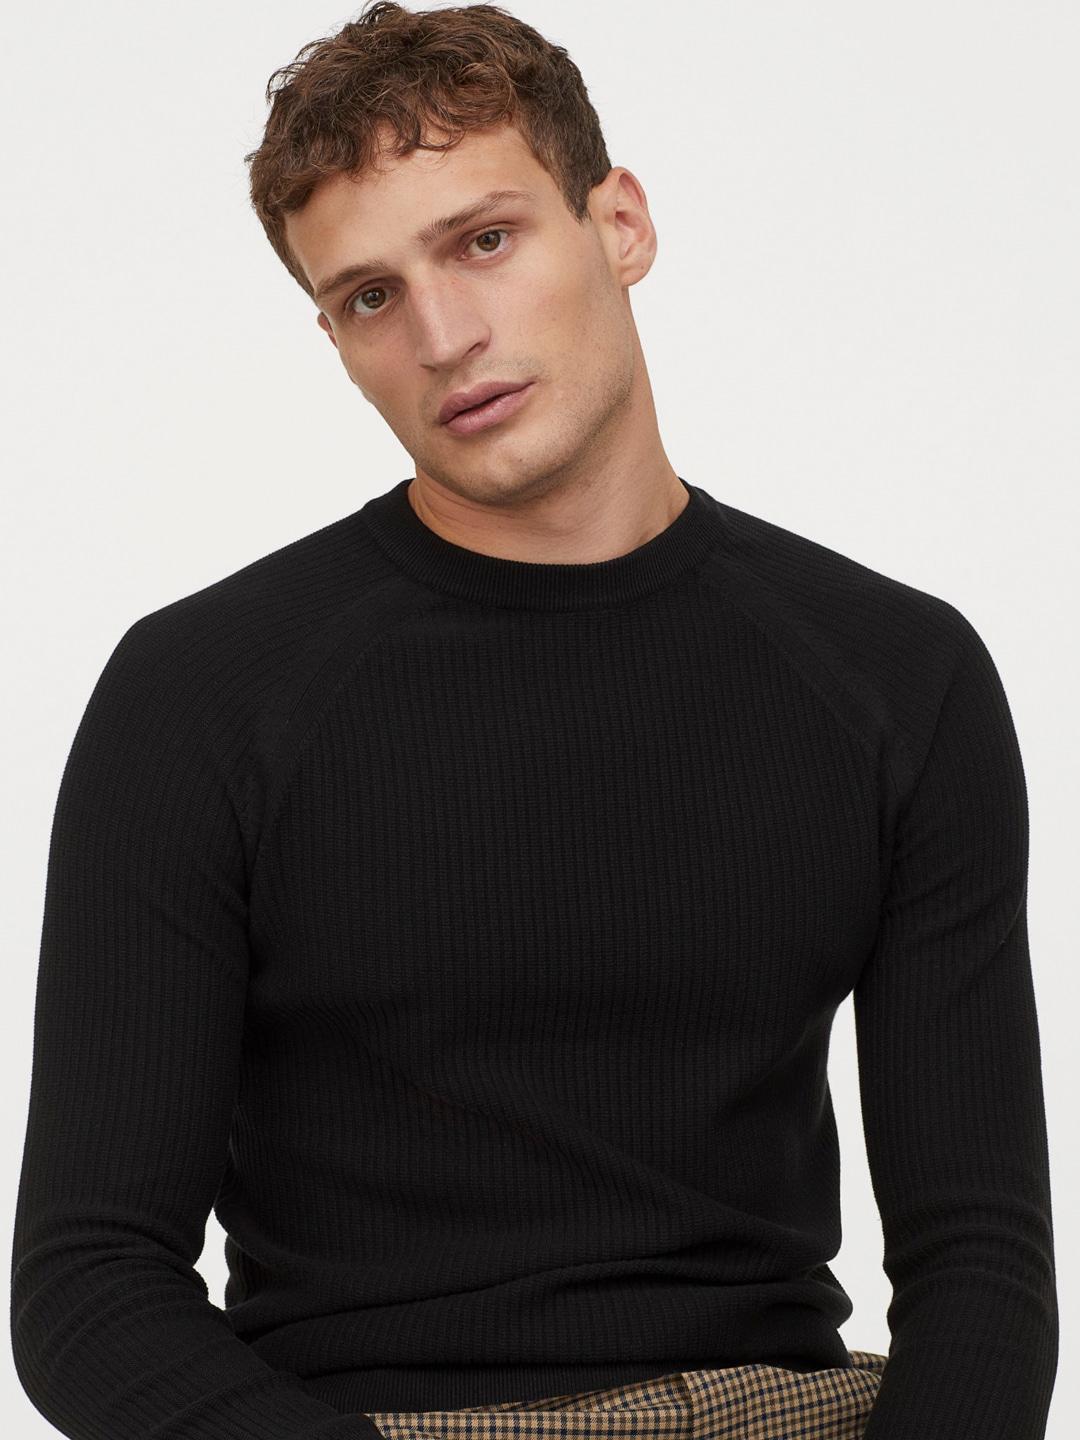 H&M Men Black Solid Knitted Jumper Muscle Fit